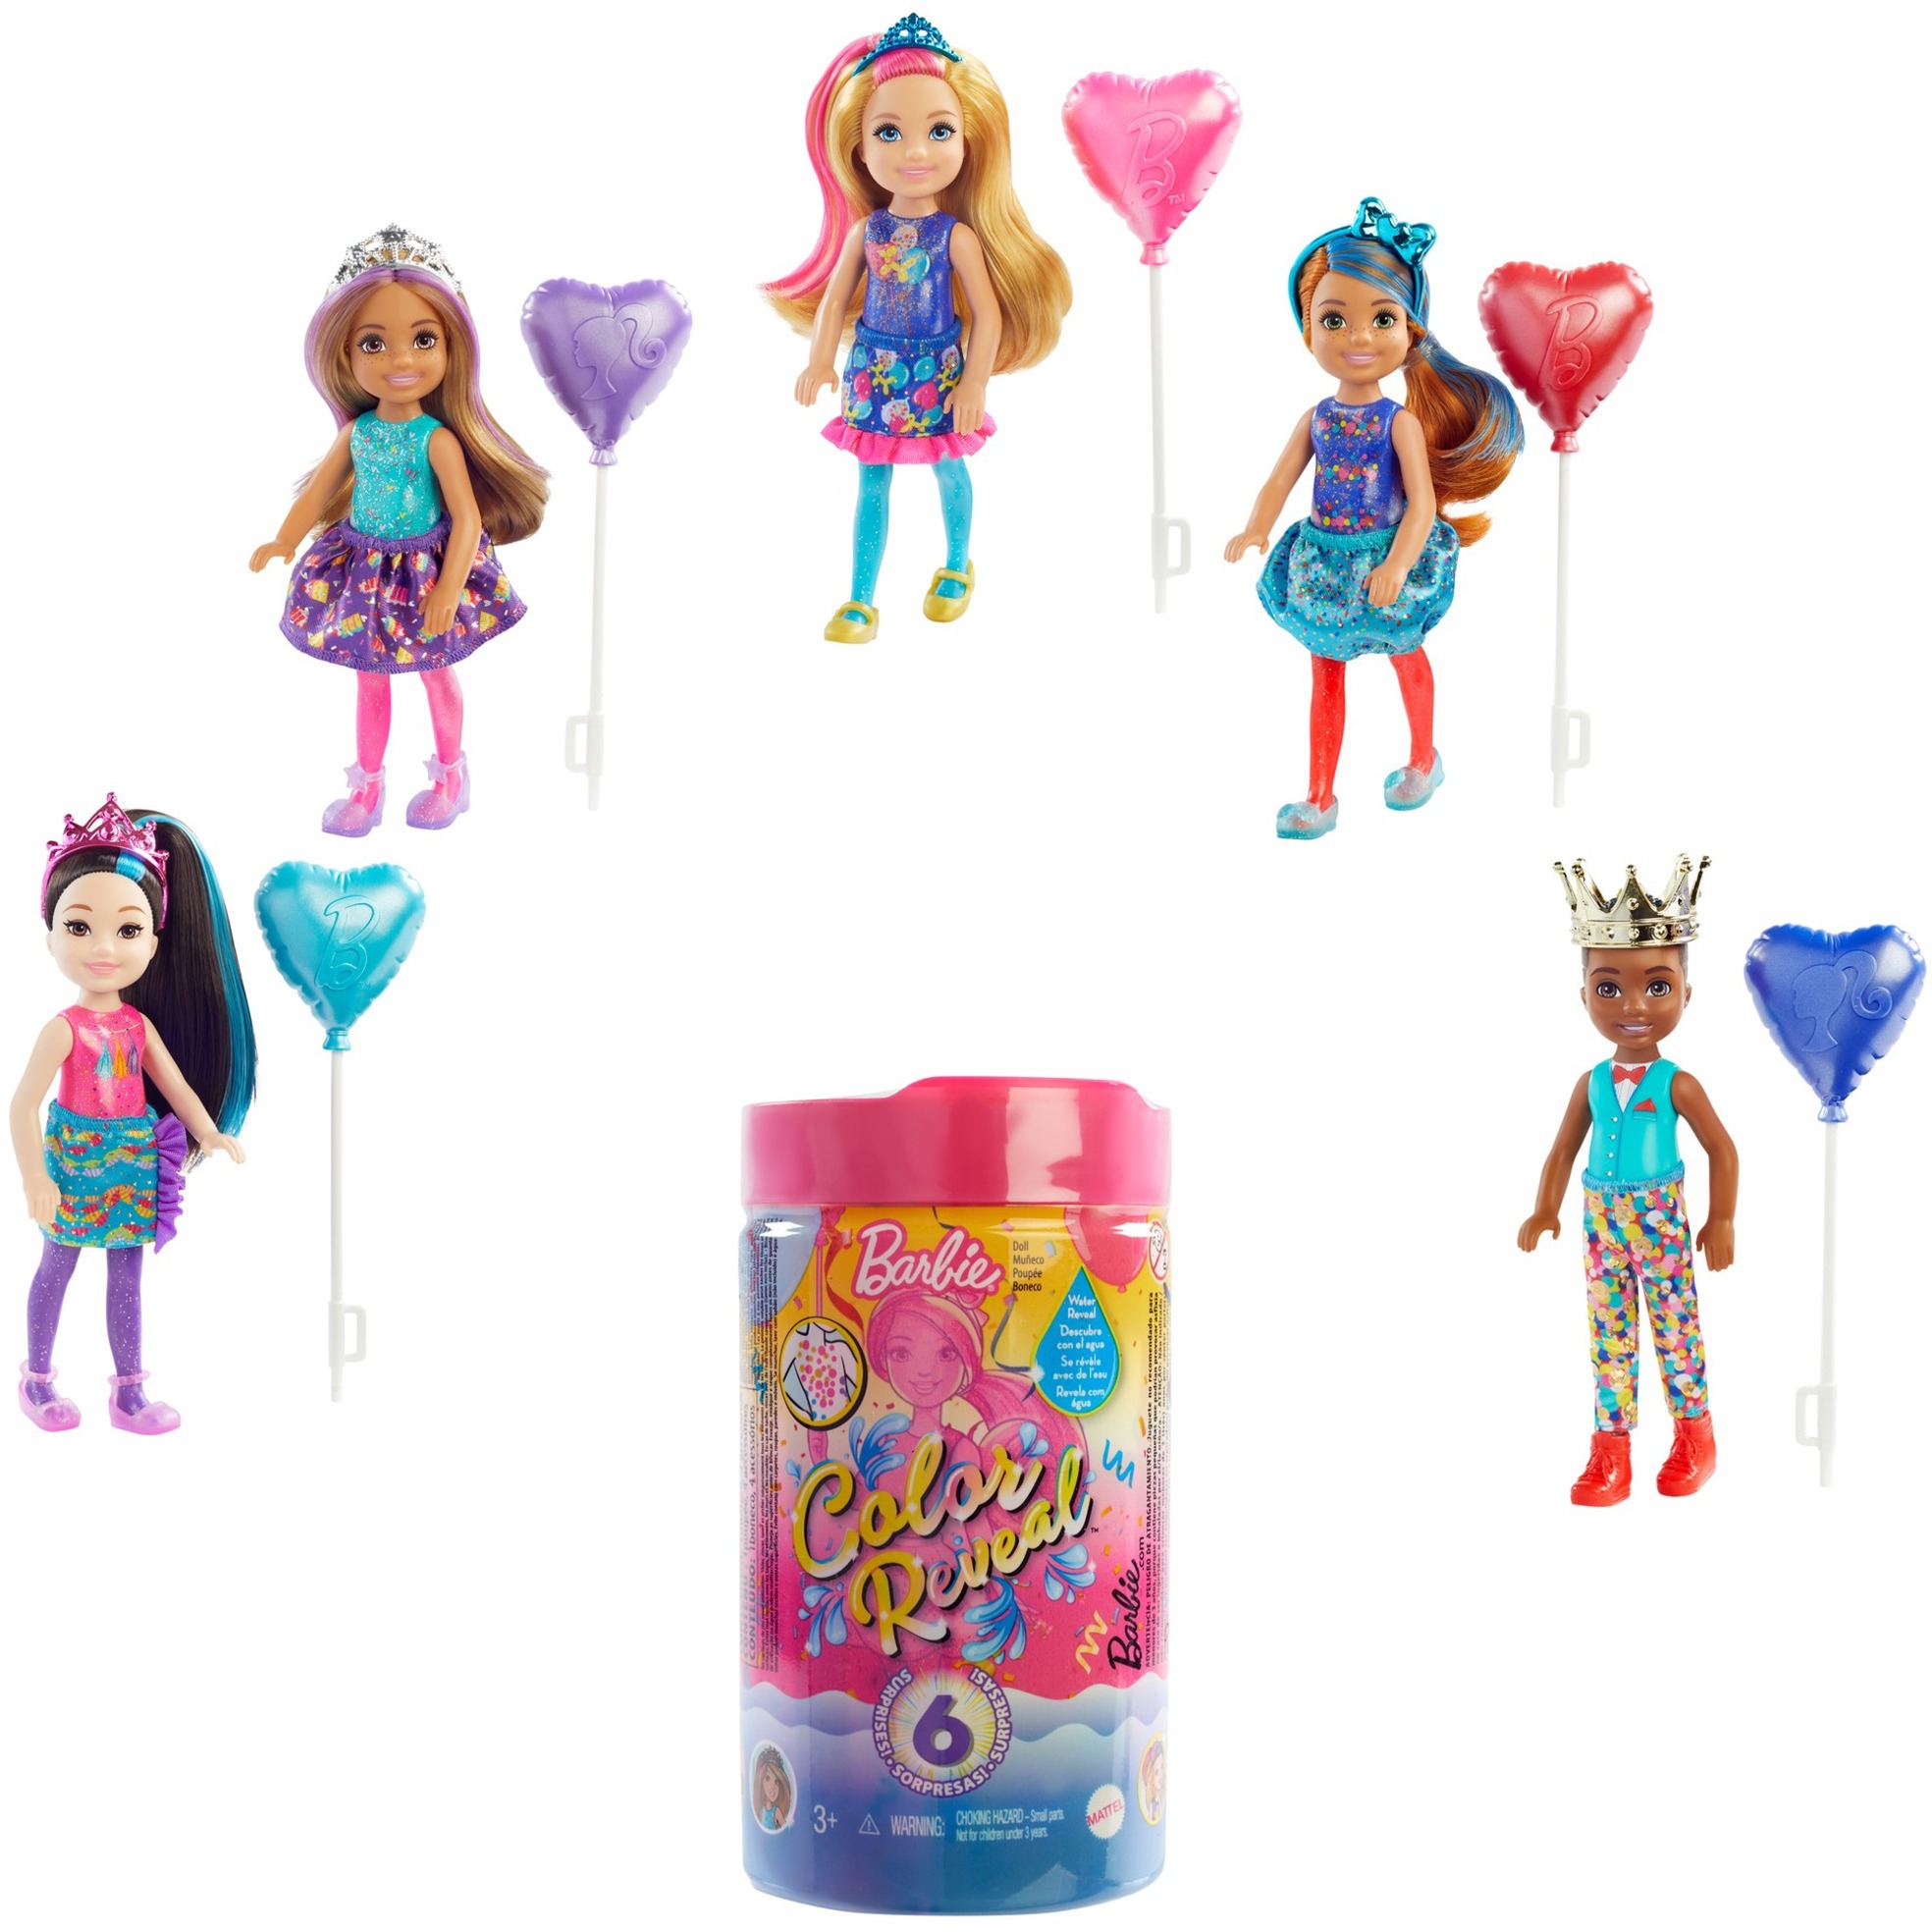 Image of Alternate - Barbie Color Reveal Chelsea Puppe Party Serie online einkaufen bei Alternate